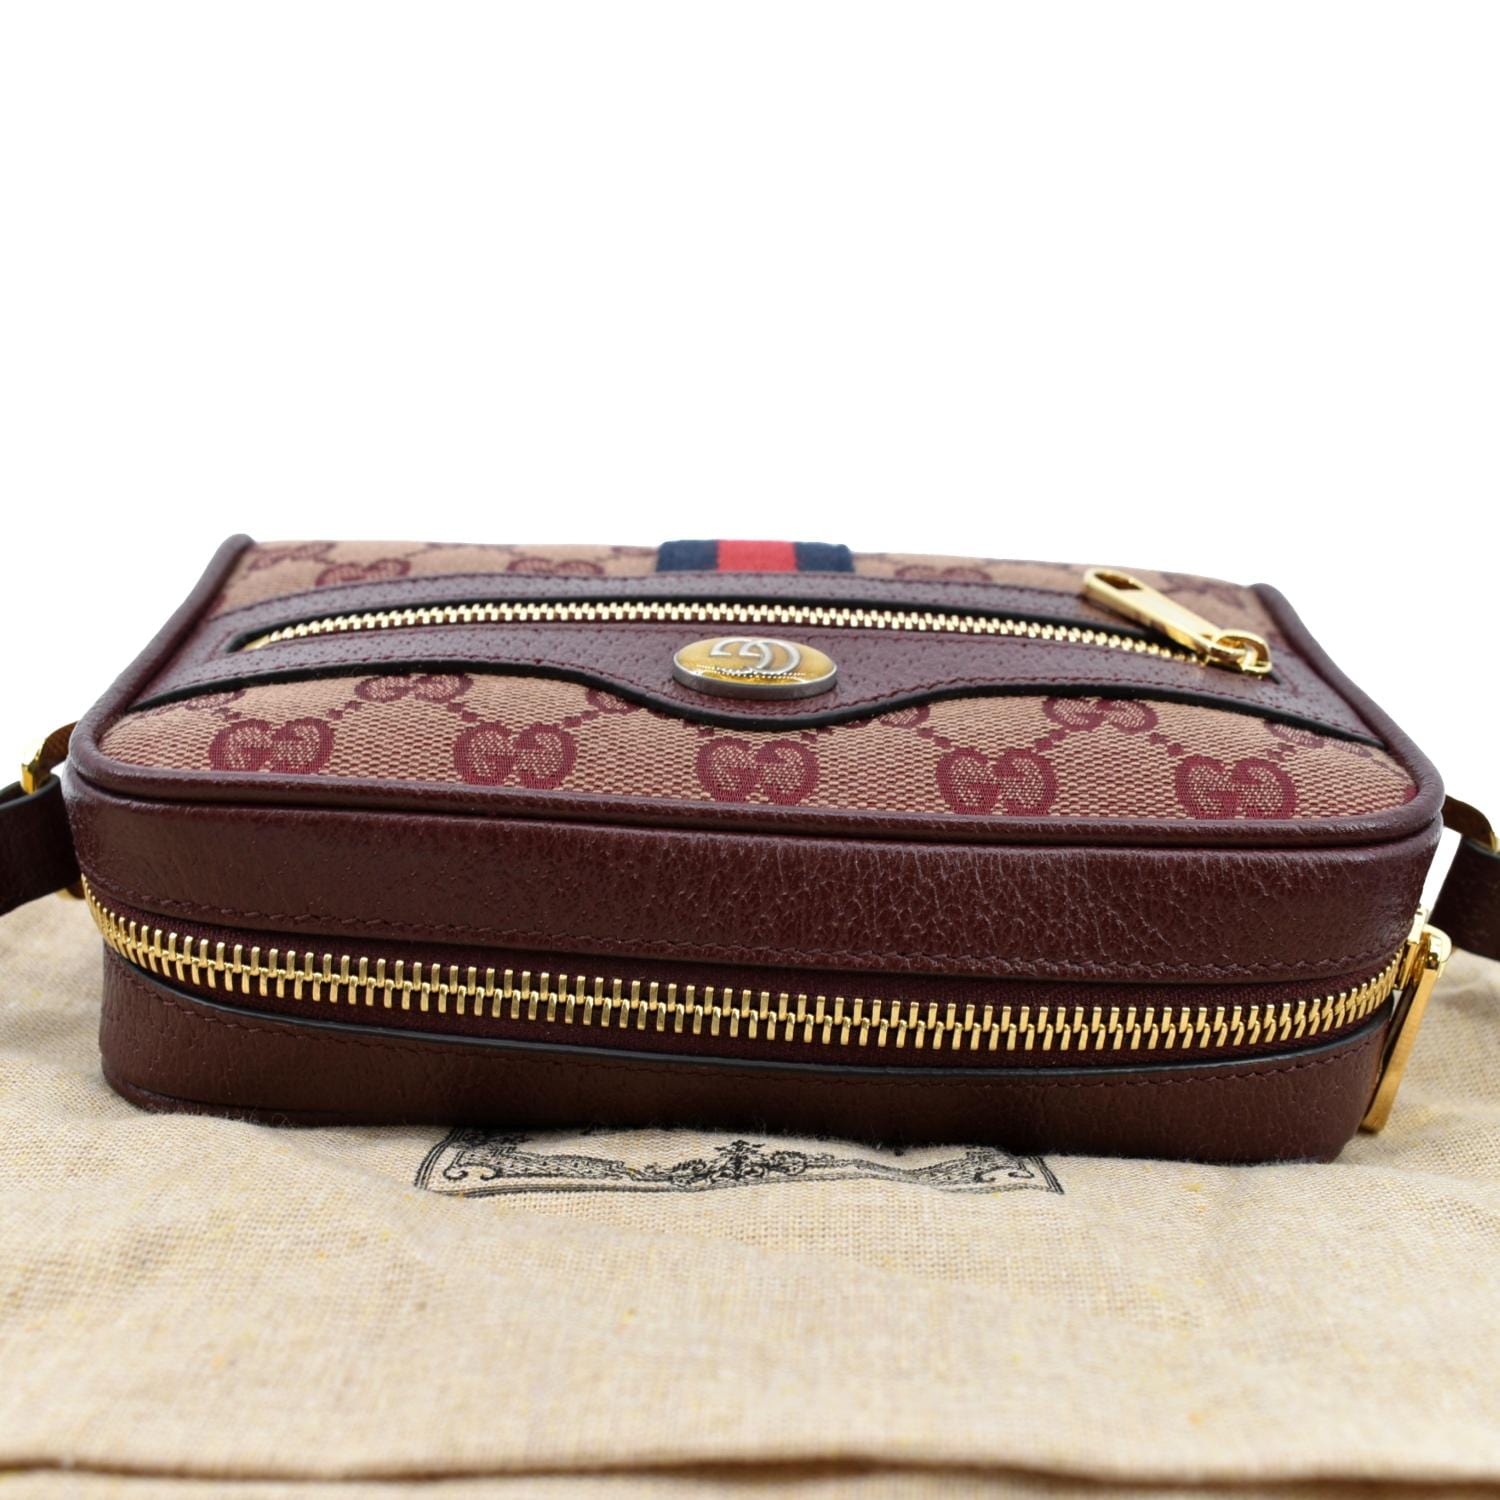 Gucci Mini Ophidia Toiletry Case Brown Gg Supreme Canvas Weekend